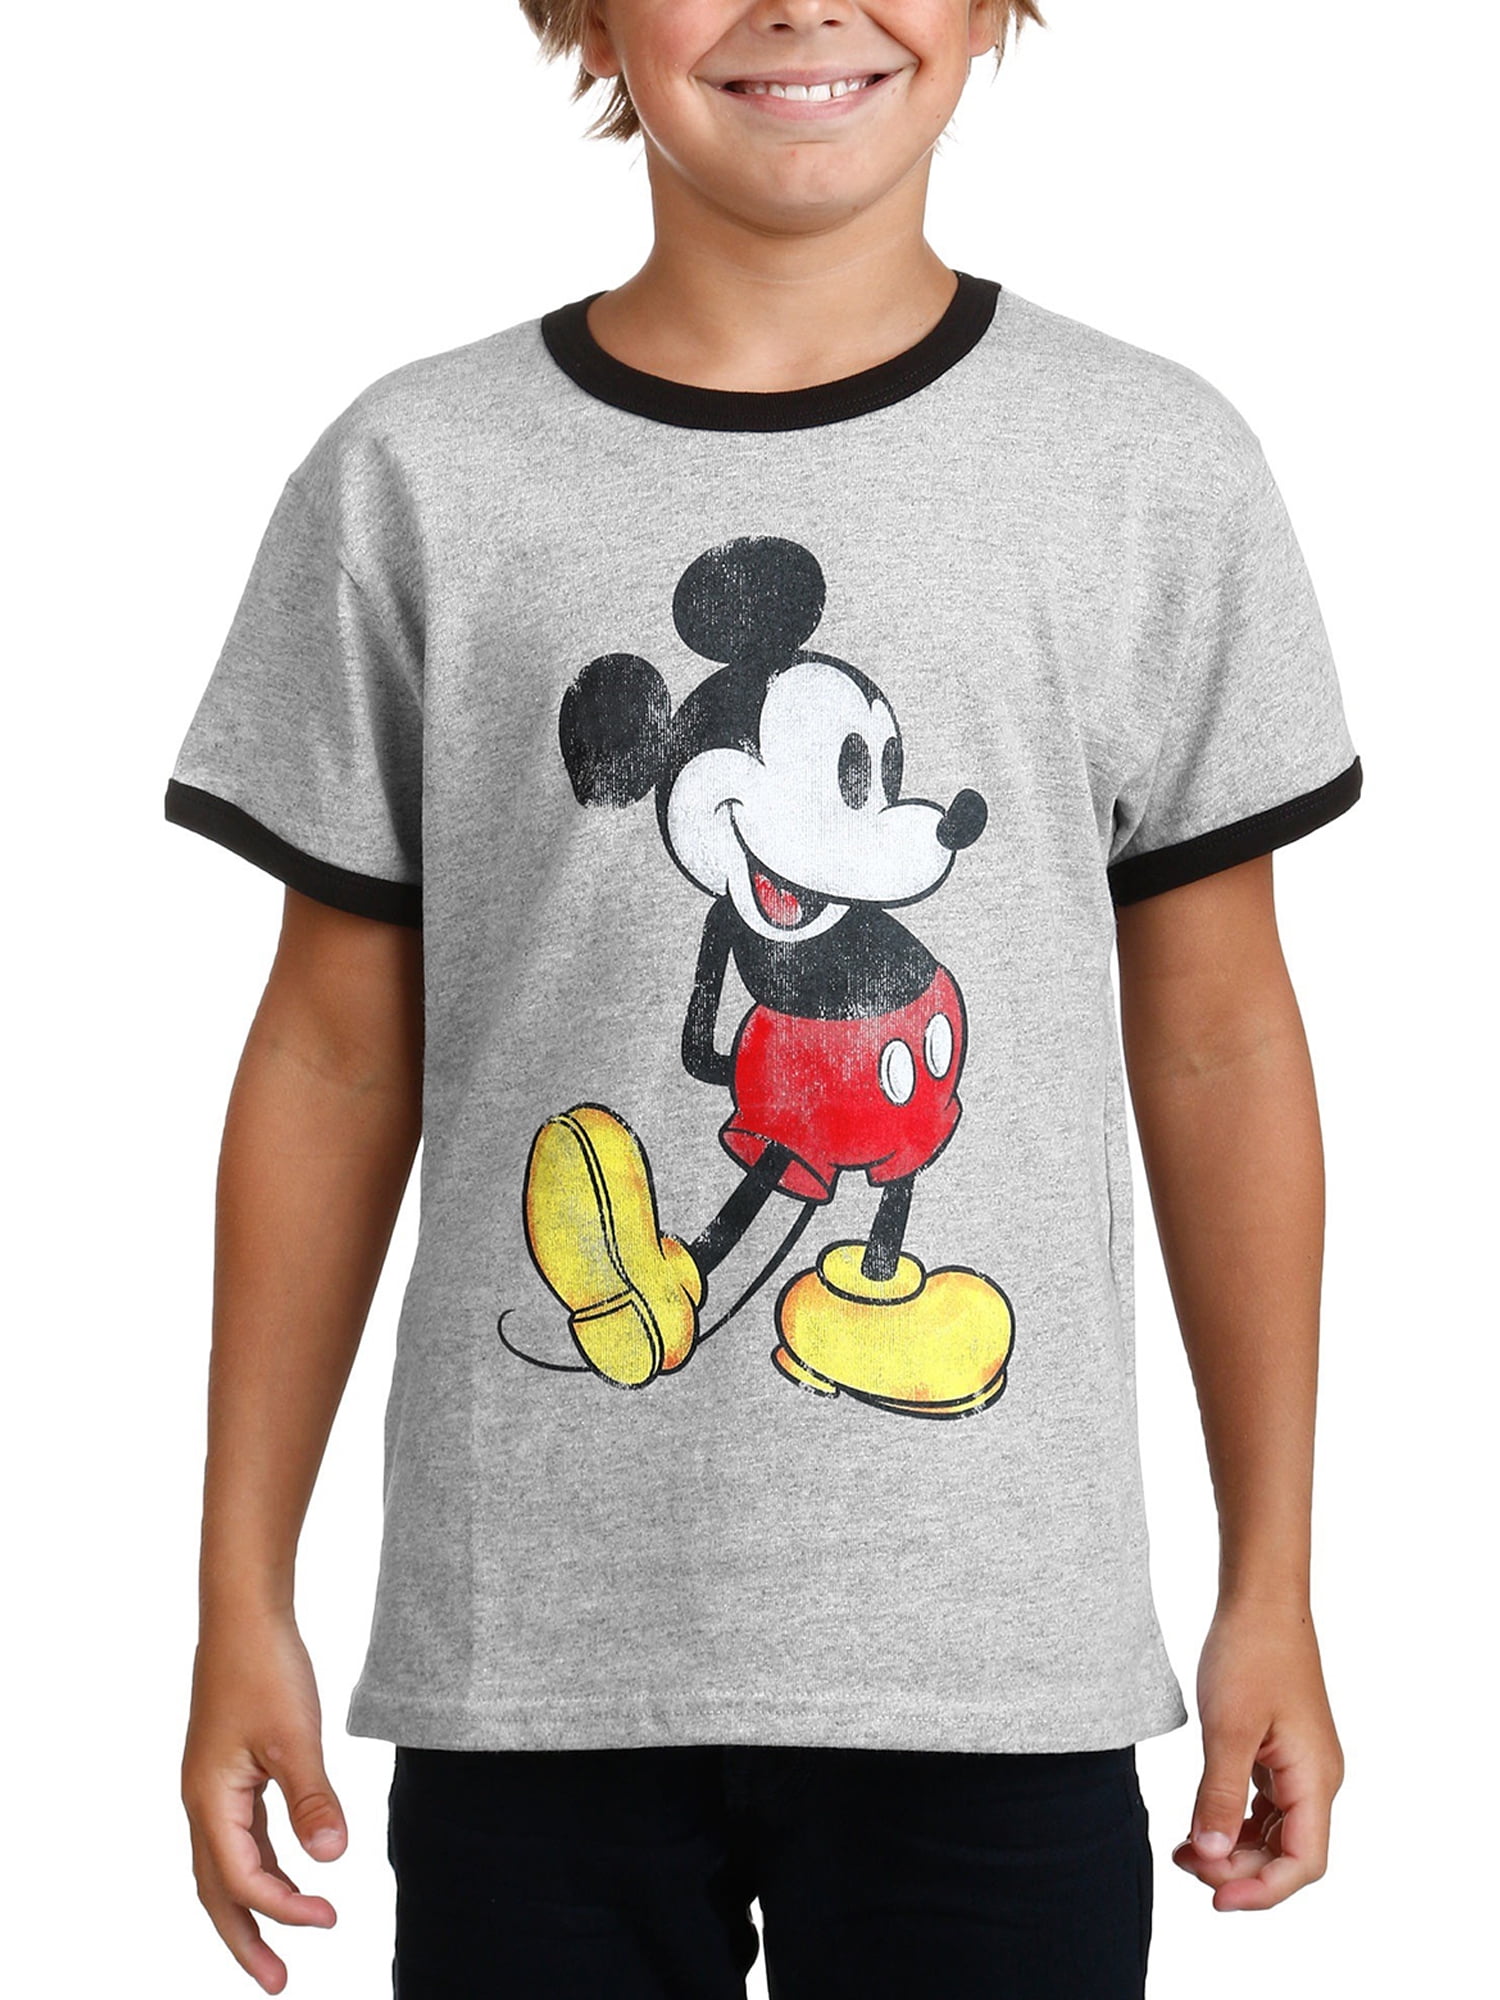 Disney Character Micky Mouse Funny Comic Cartoon Half Sleeves T Shirt For kids 